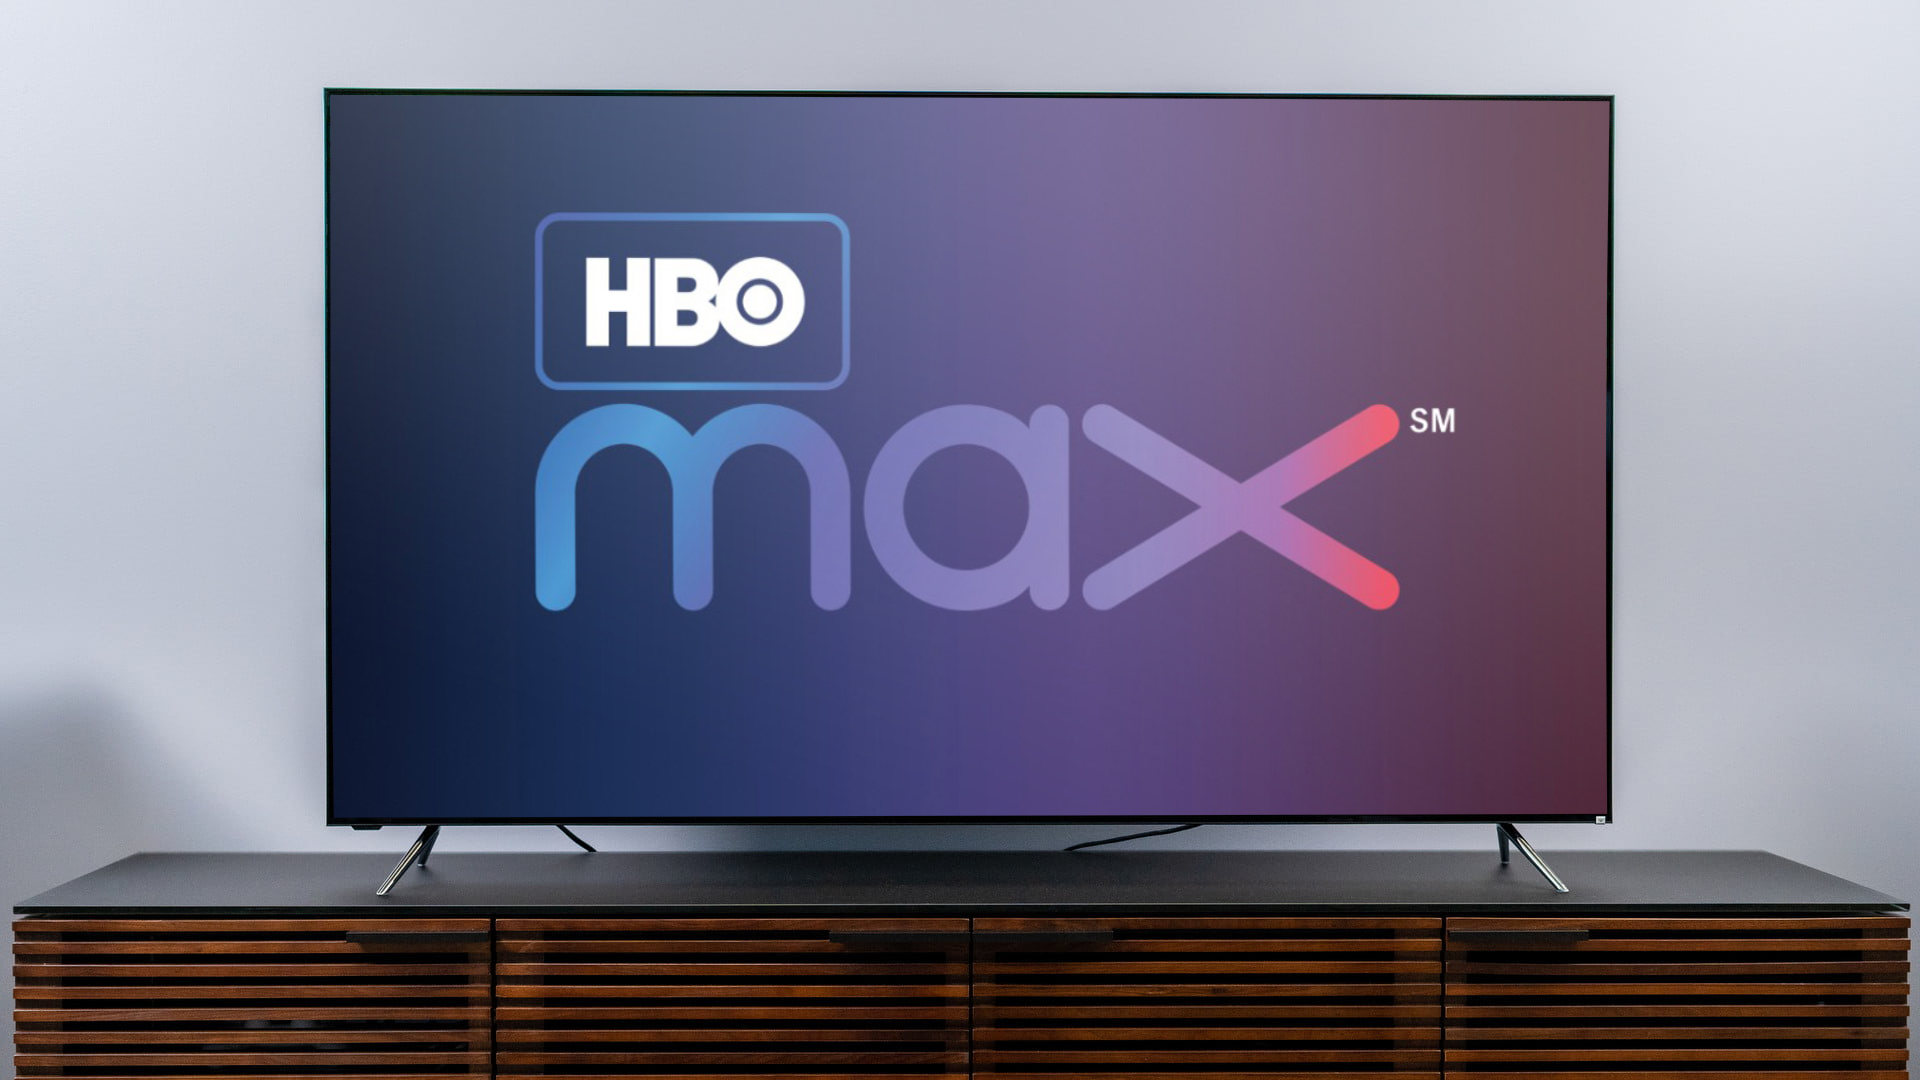 HBO Max review